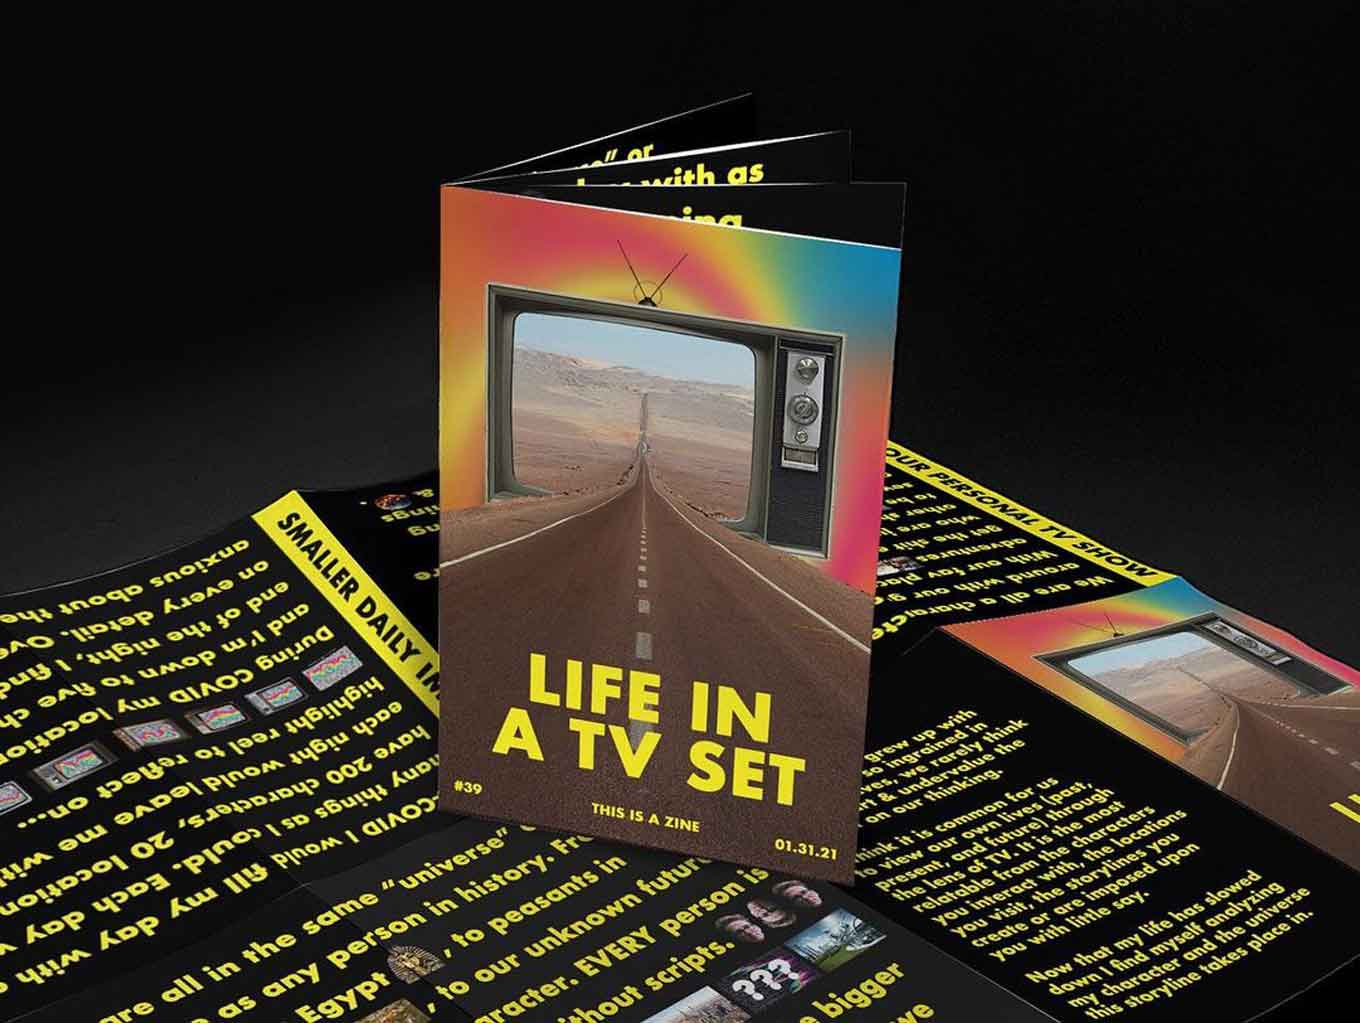 A colorful zine mockup shows a vintage TV against a gradient background and reads "Life In A TV Set."